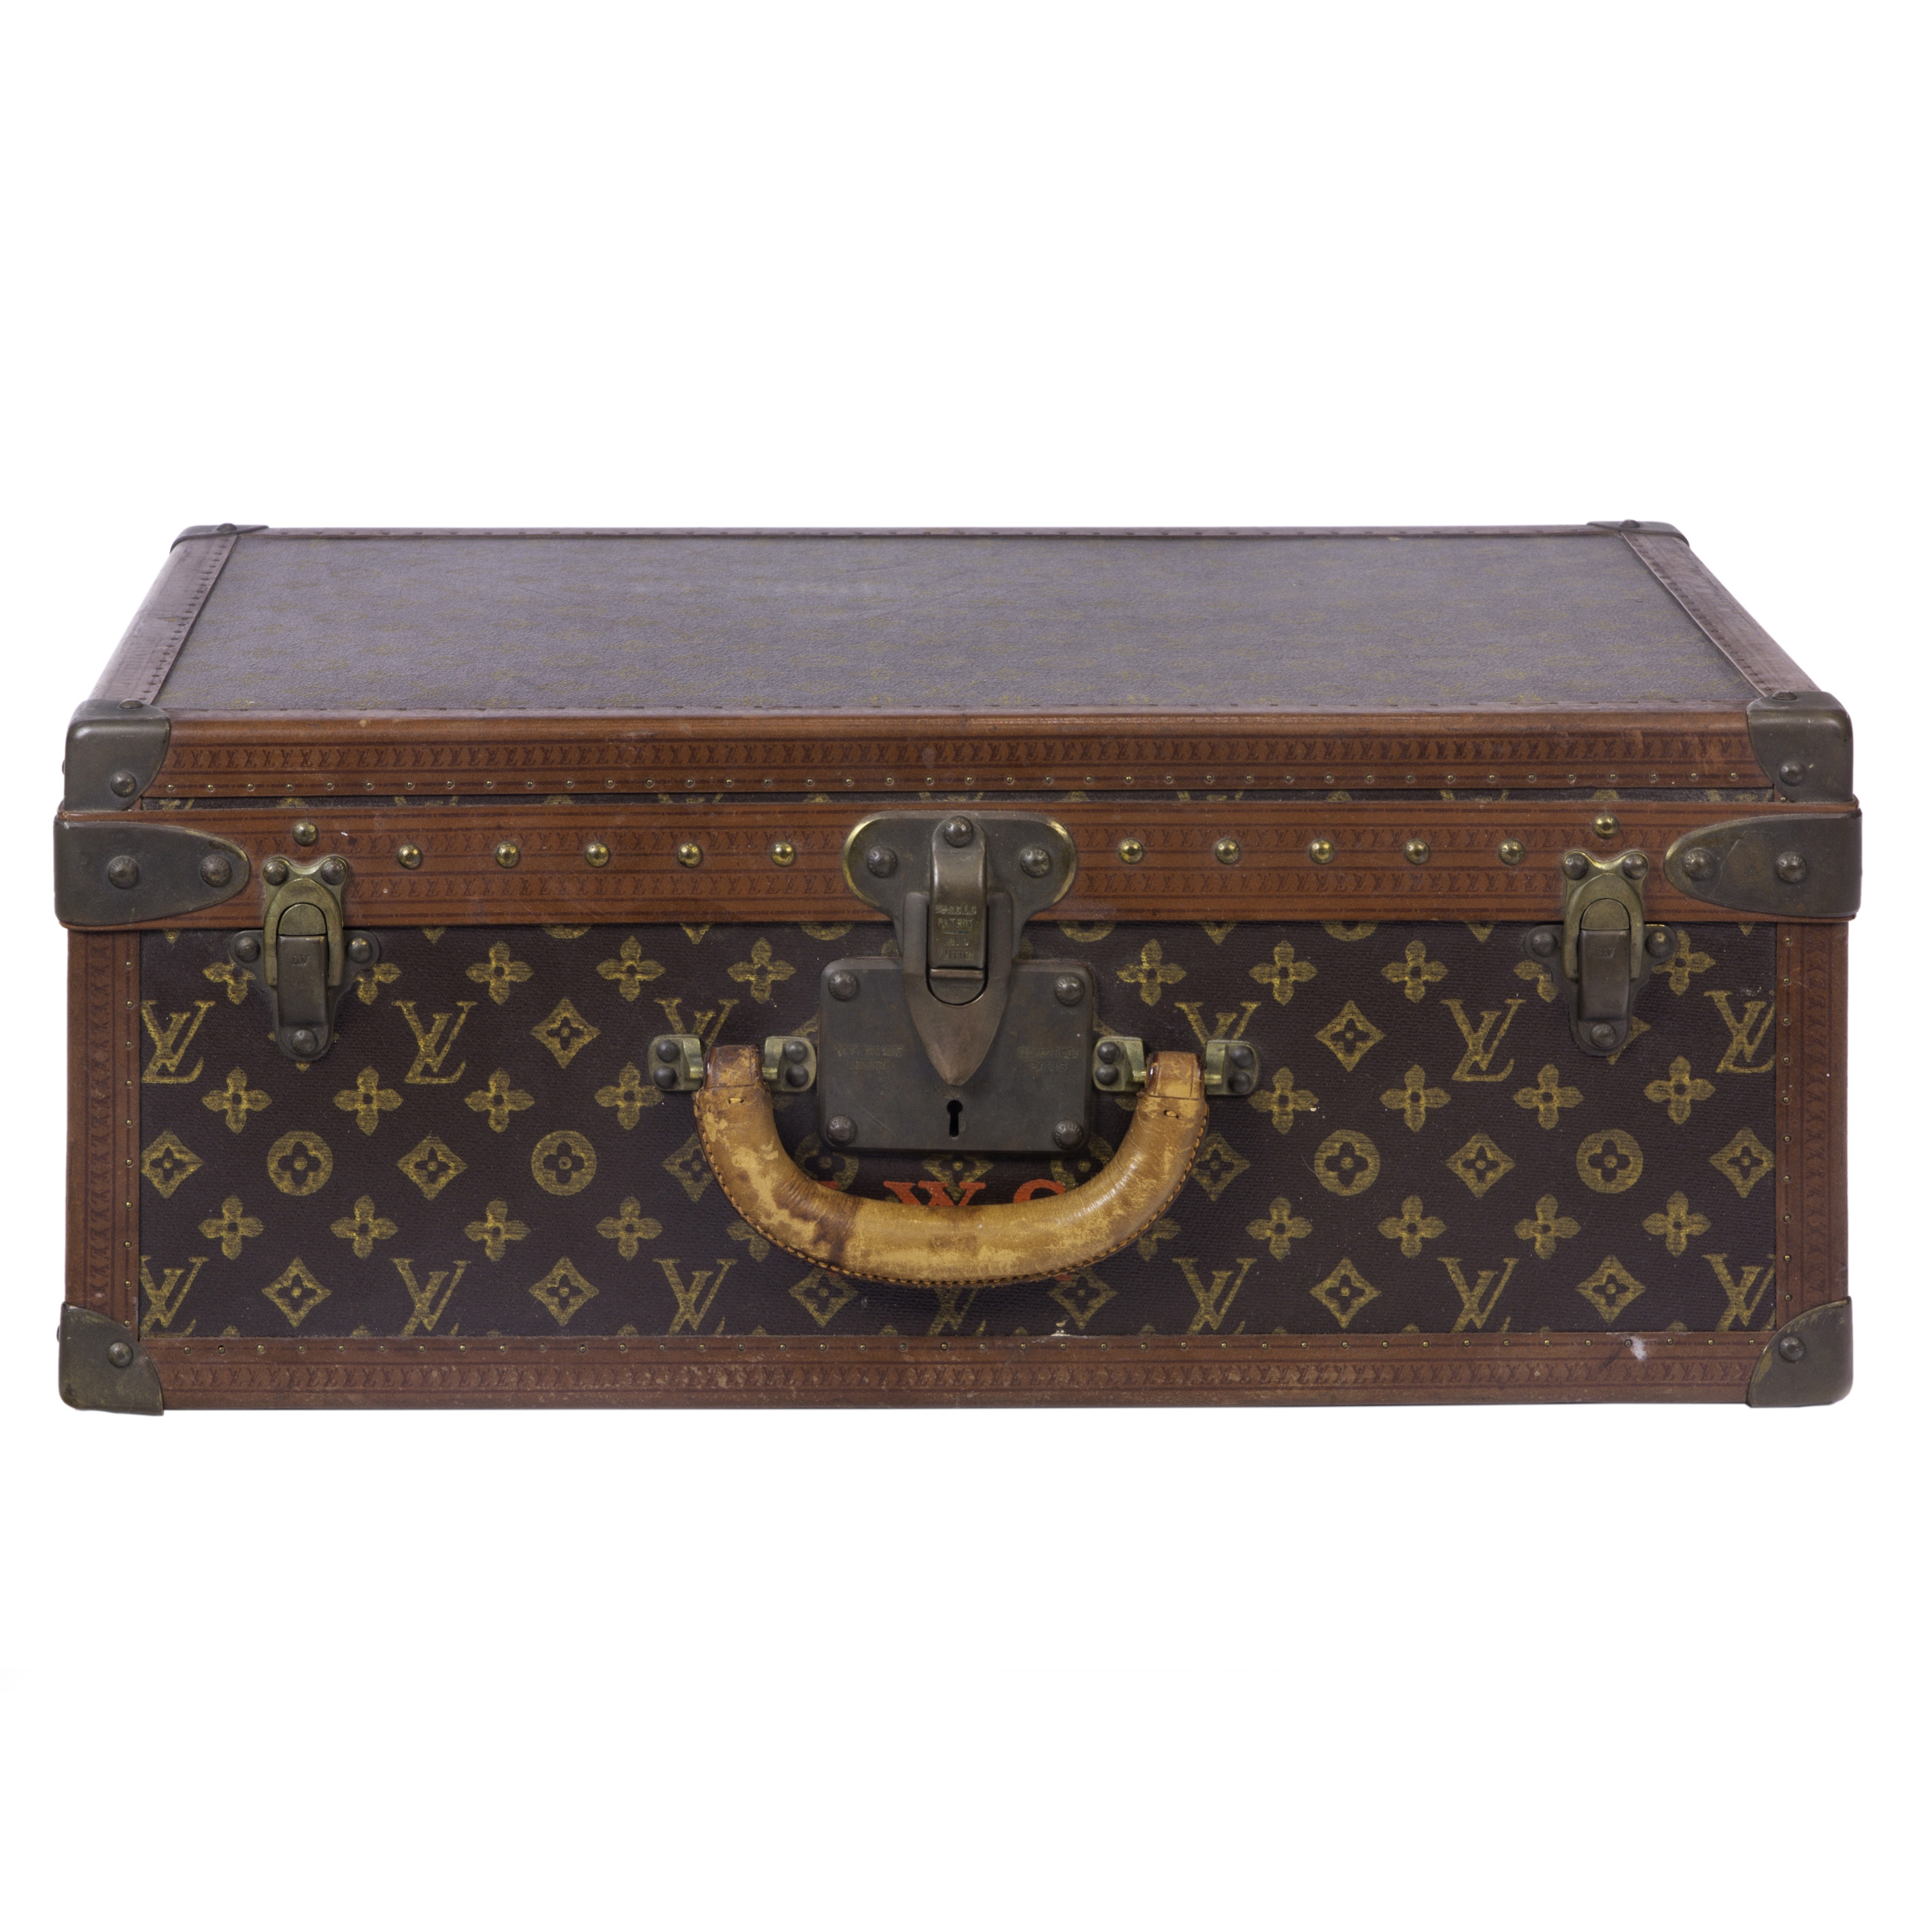 Louis Vuitton, A Group of Four Louis Vuitton Hard-Sided Suitcases